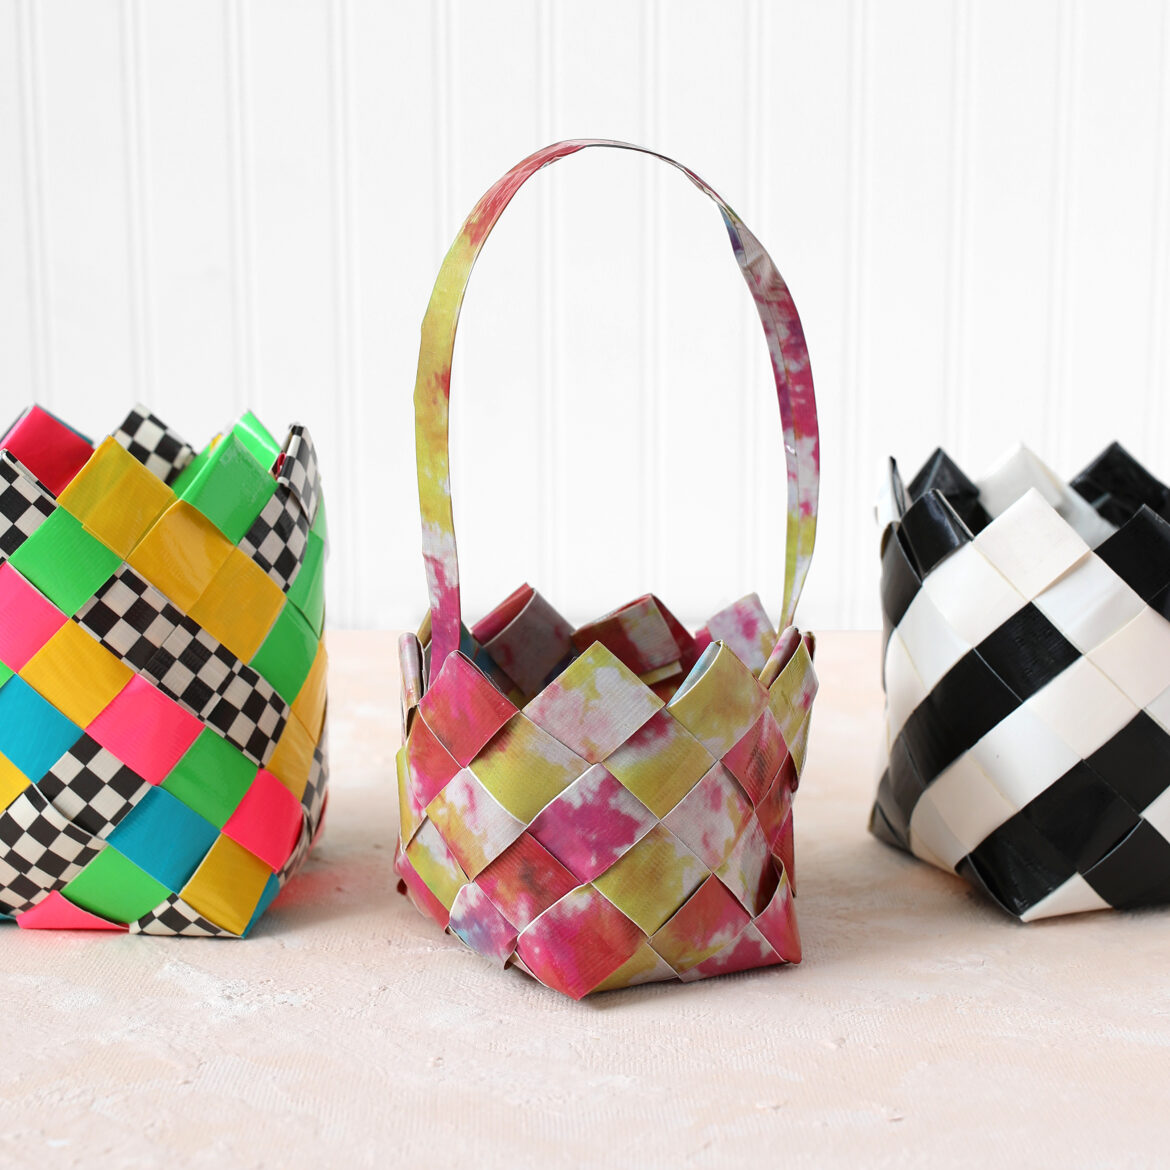 How-To: Duck Tape® Woven Baskets